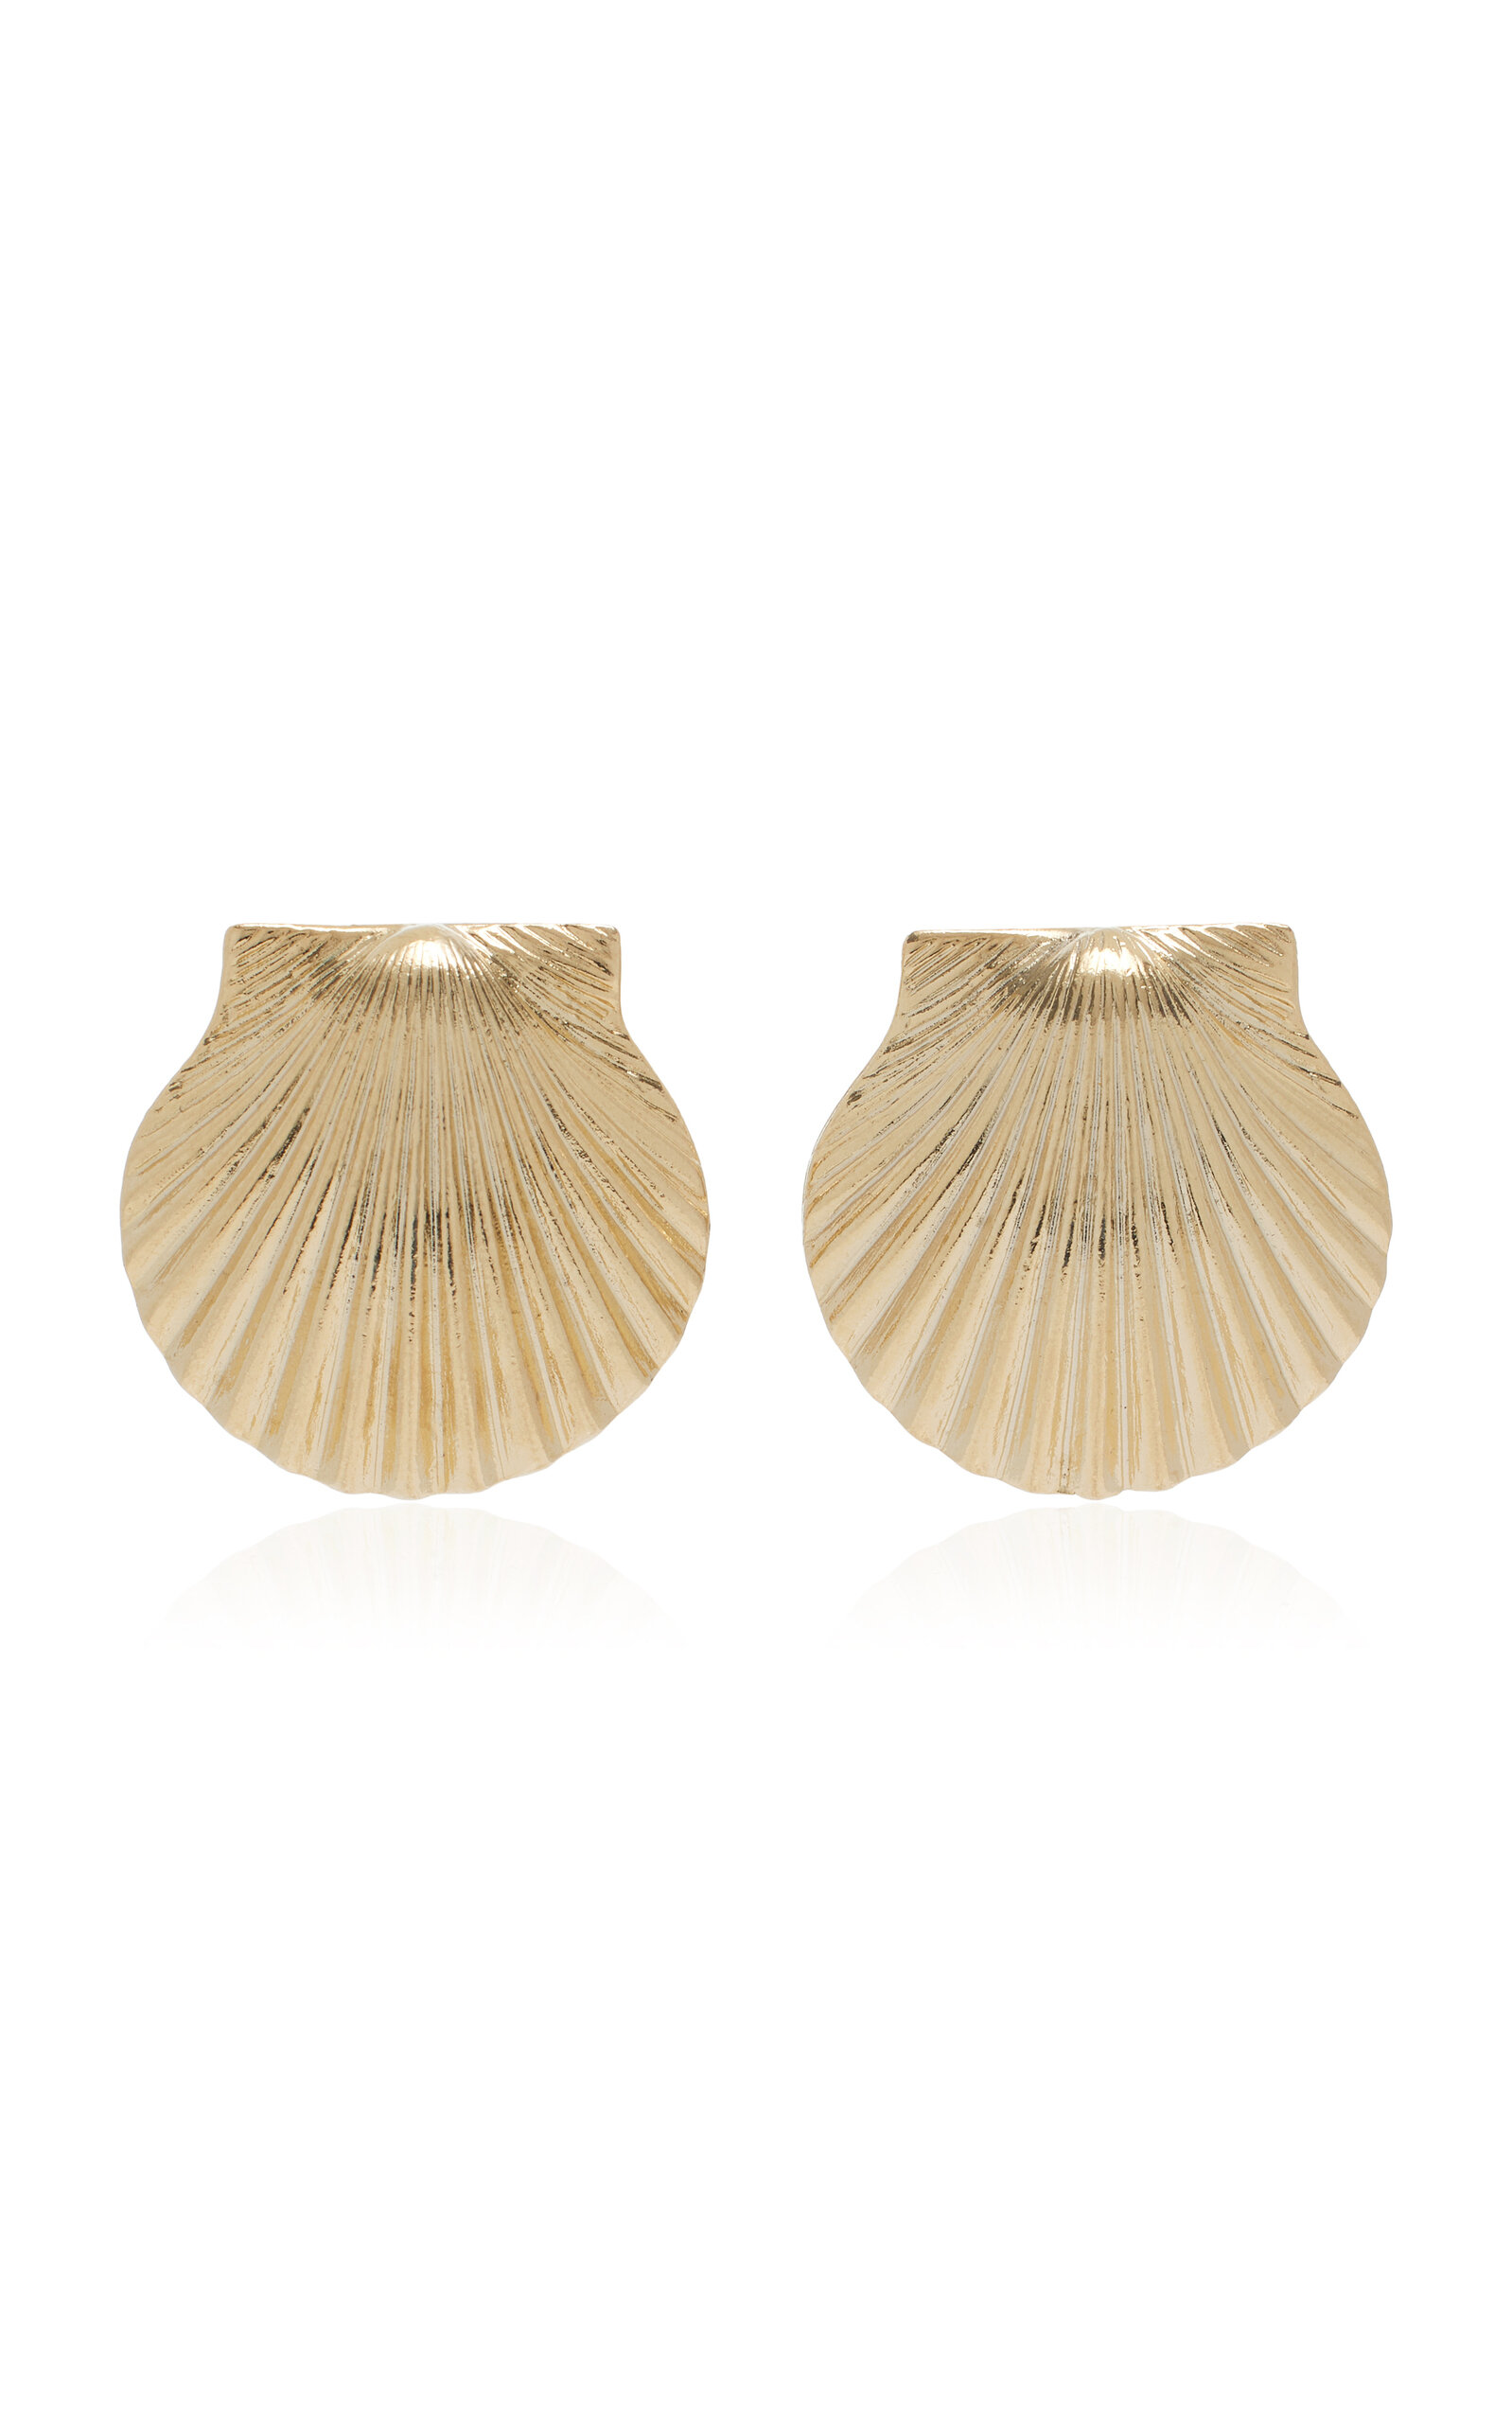 Ben-amun Exclusive 24k Gold-plated Shell Earrings